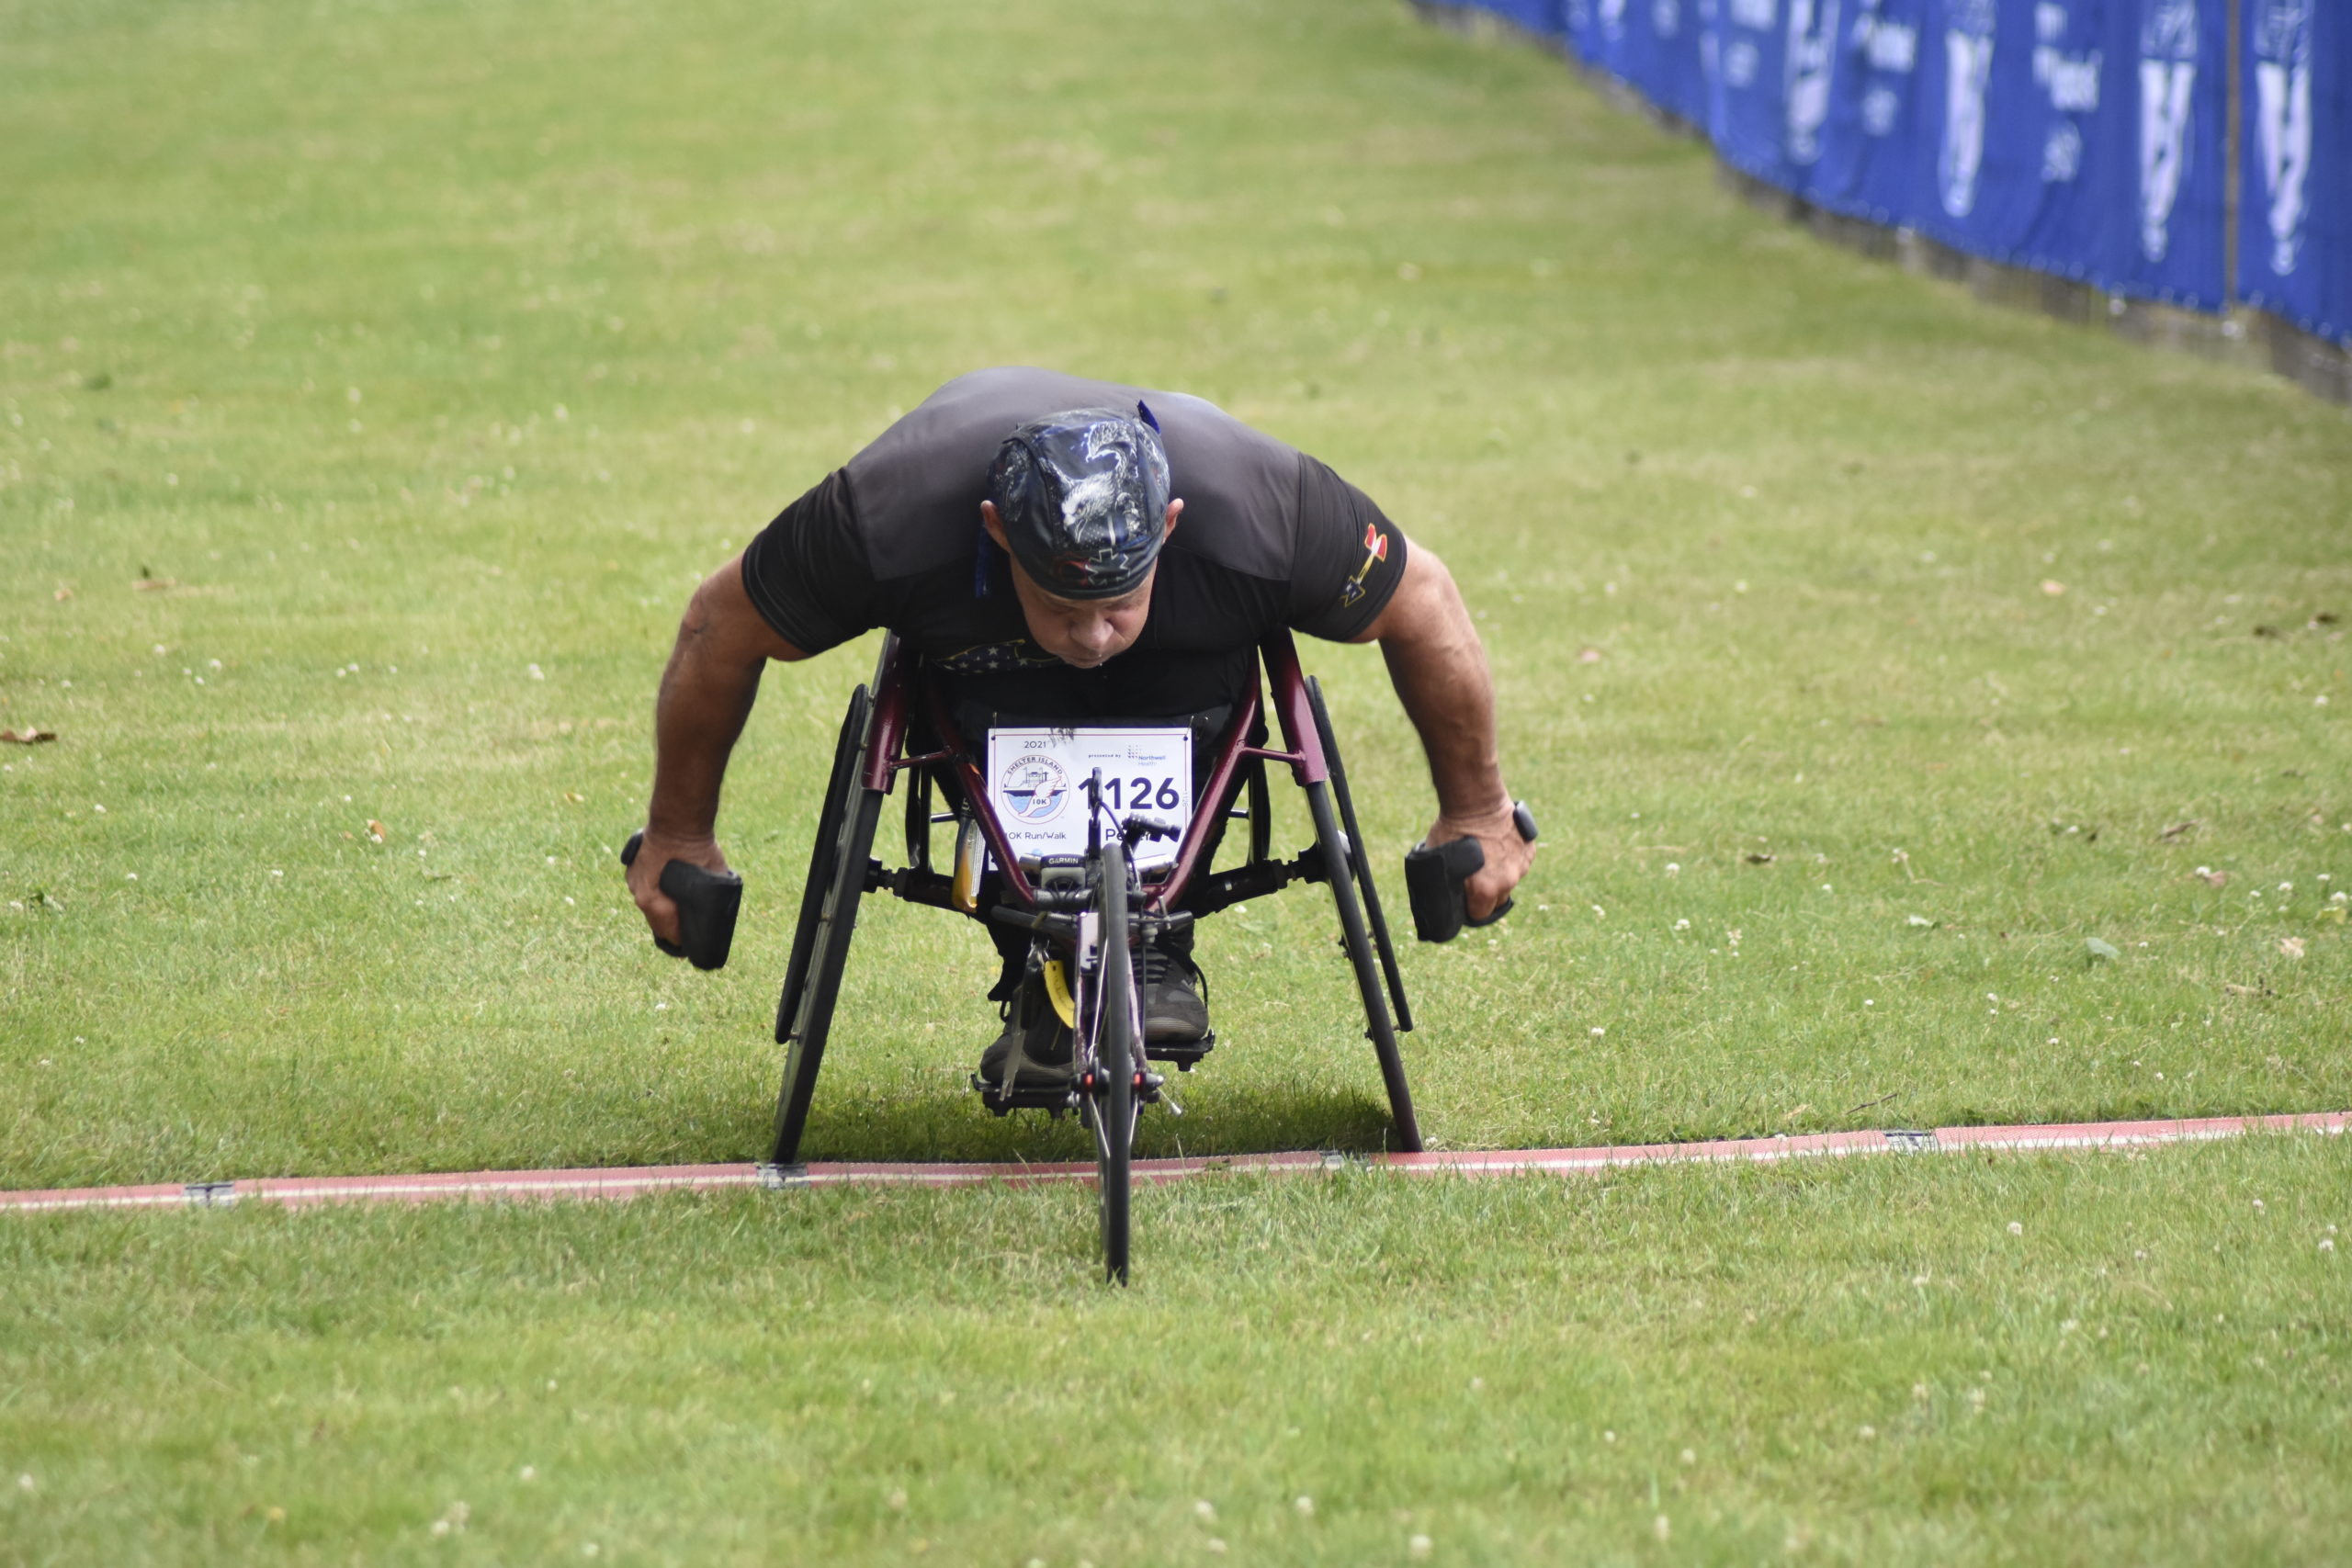 Peter Hawkins, 57, of Malverne was once again the champion of the wheelchair division.